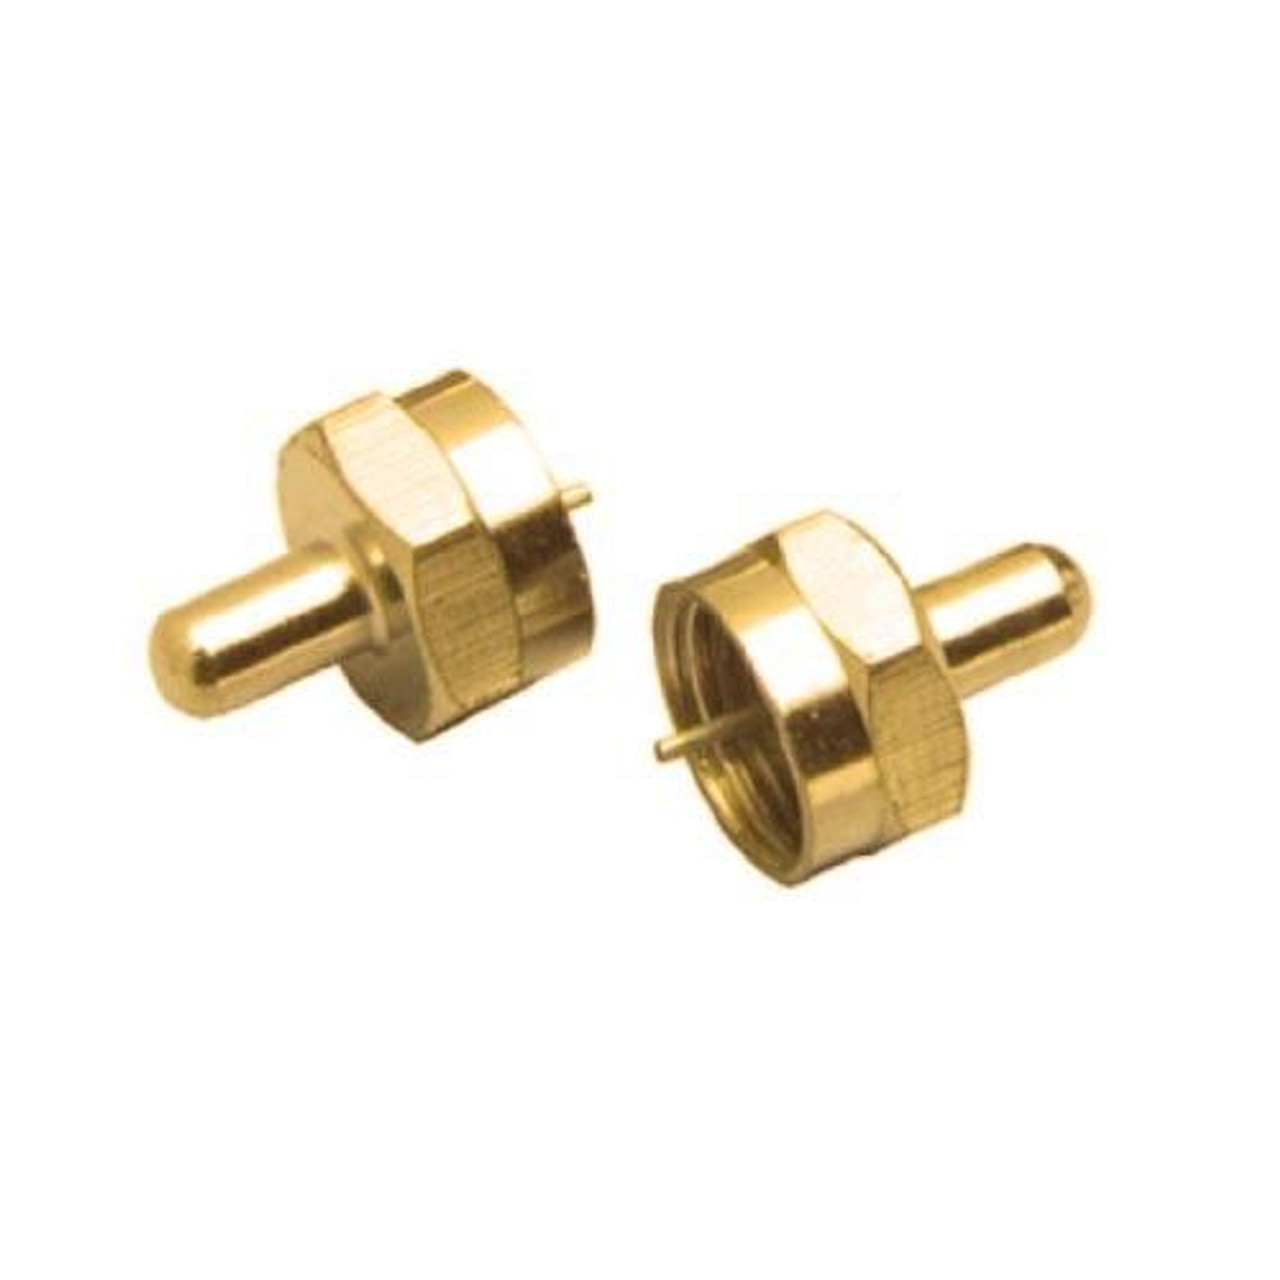 Eagle Terminator Cap Connector Coaxial Cable 75 Ohm Gold 2 Pack F-Connector Jack Digital Audio Video Signal, Part #M-61033